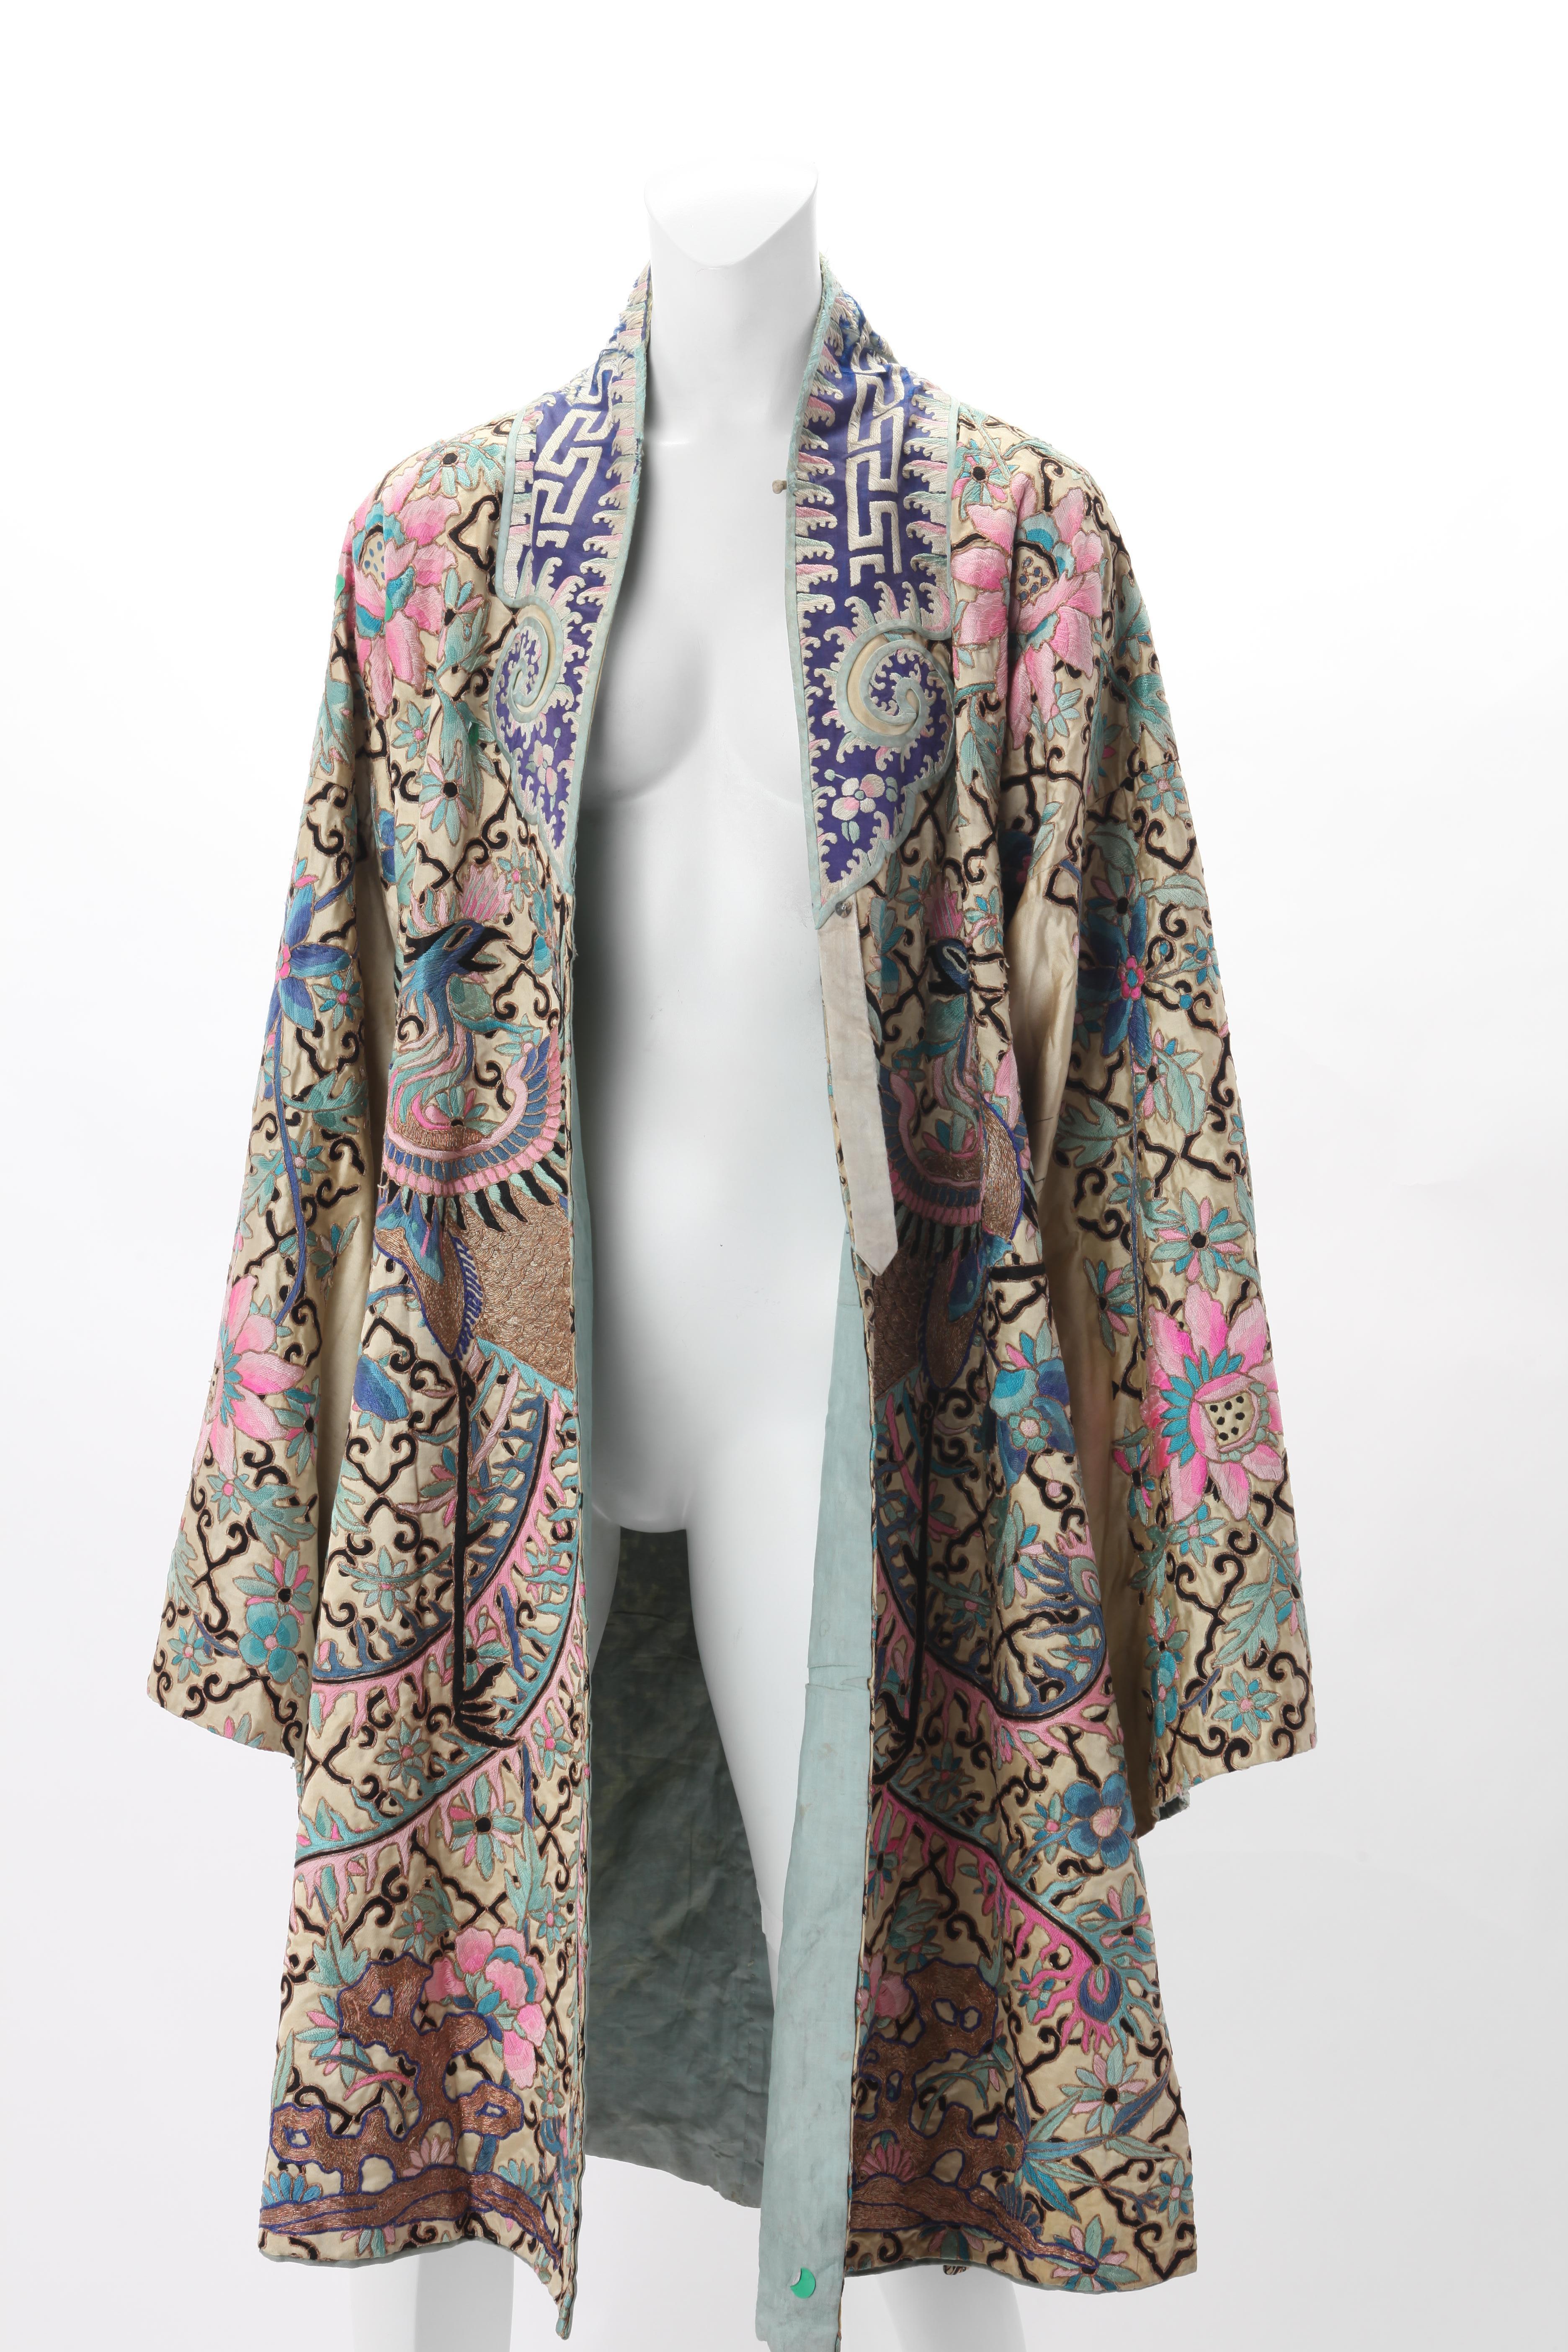 Gray Embroidered Chinese Export Robe, Early 20th Century.